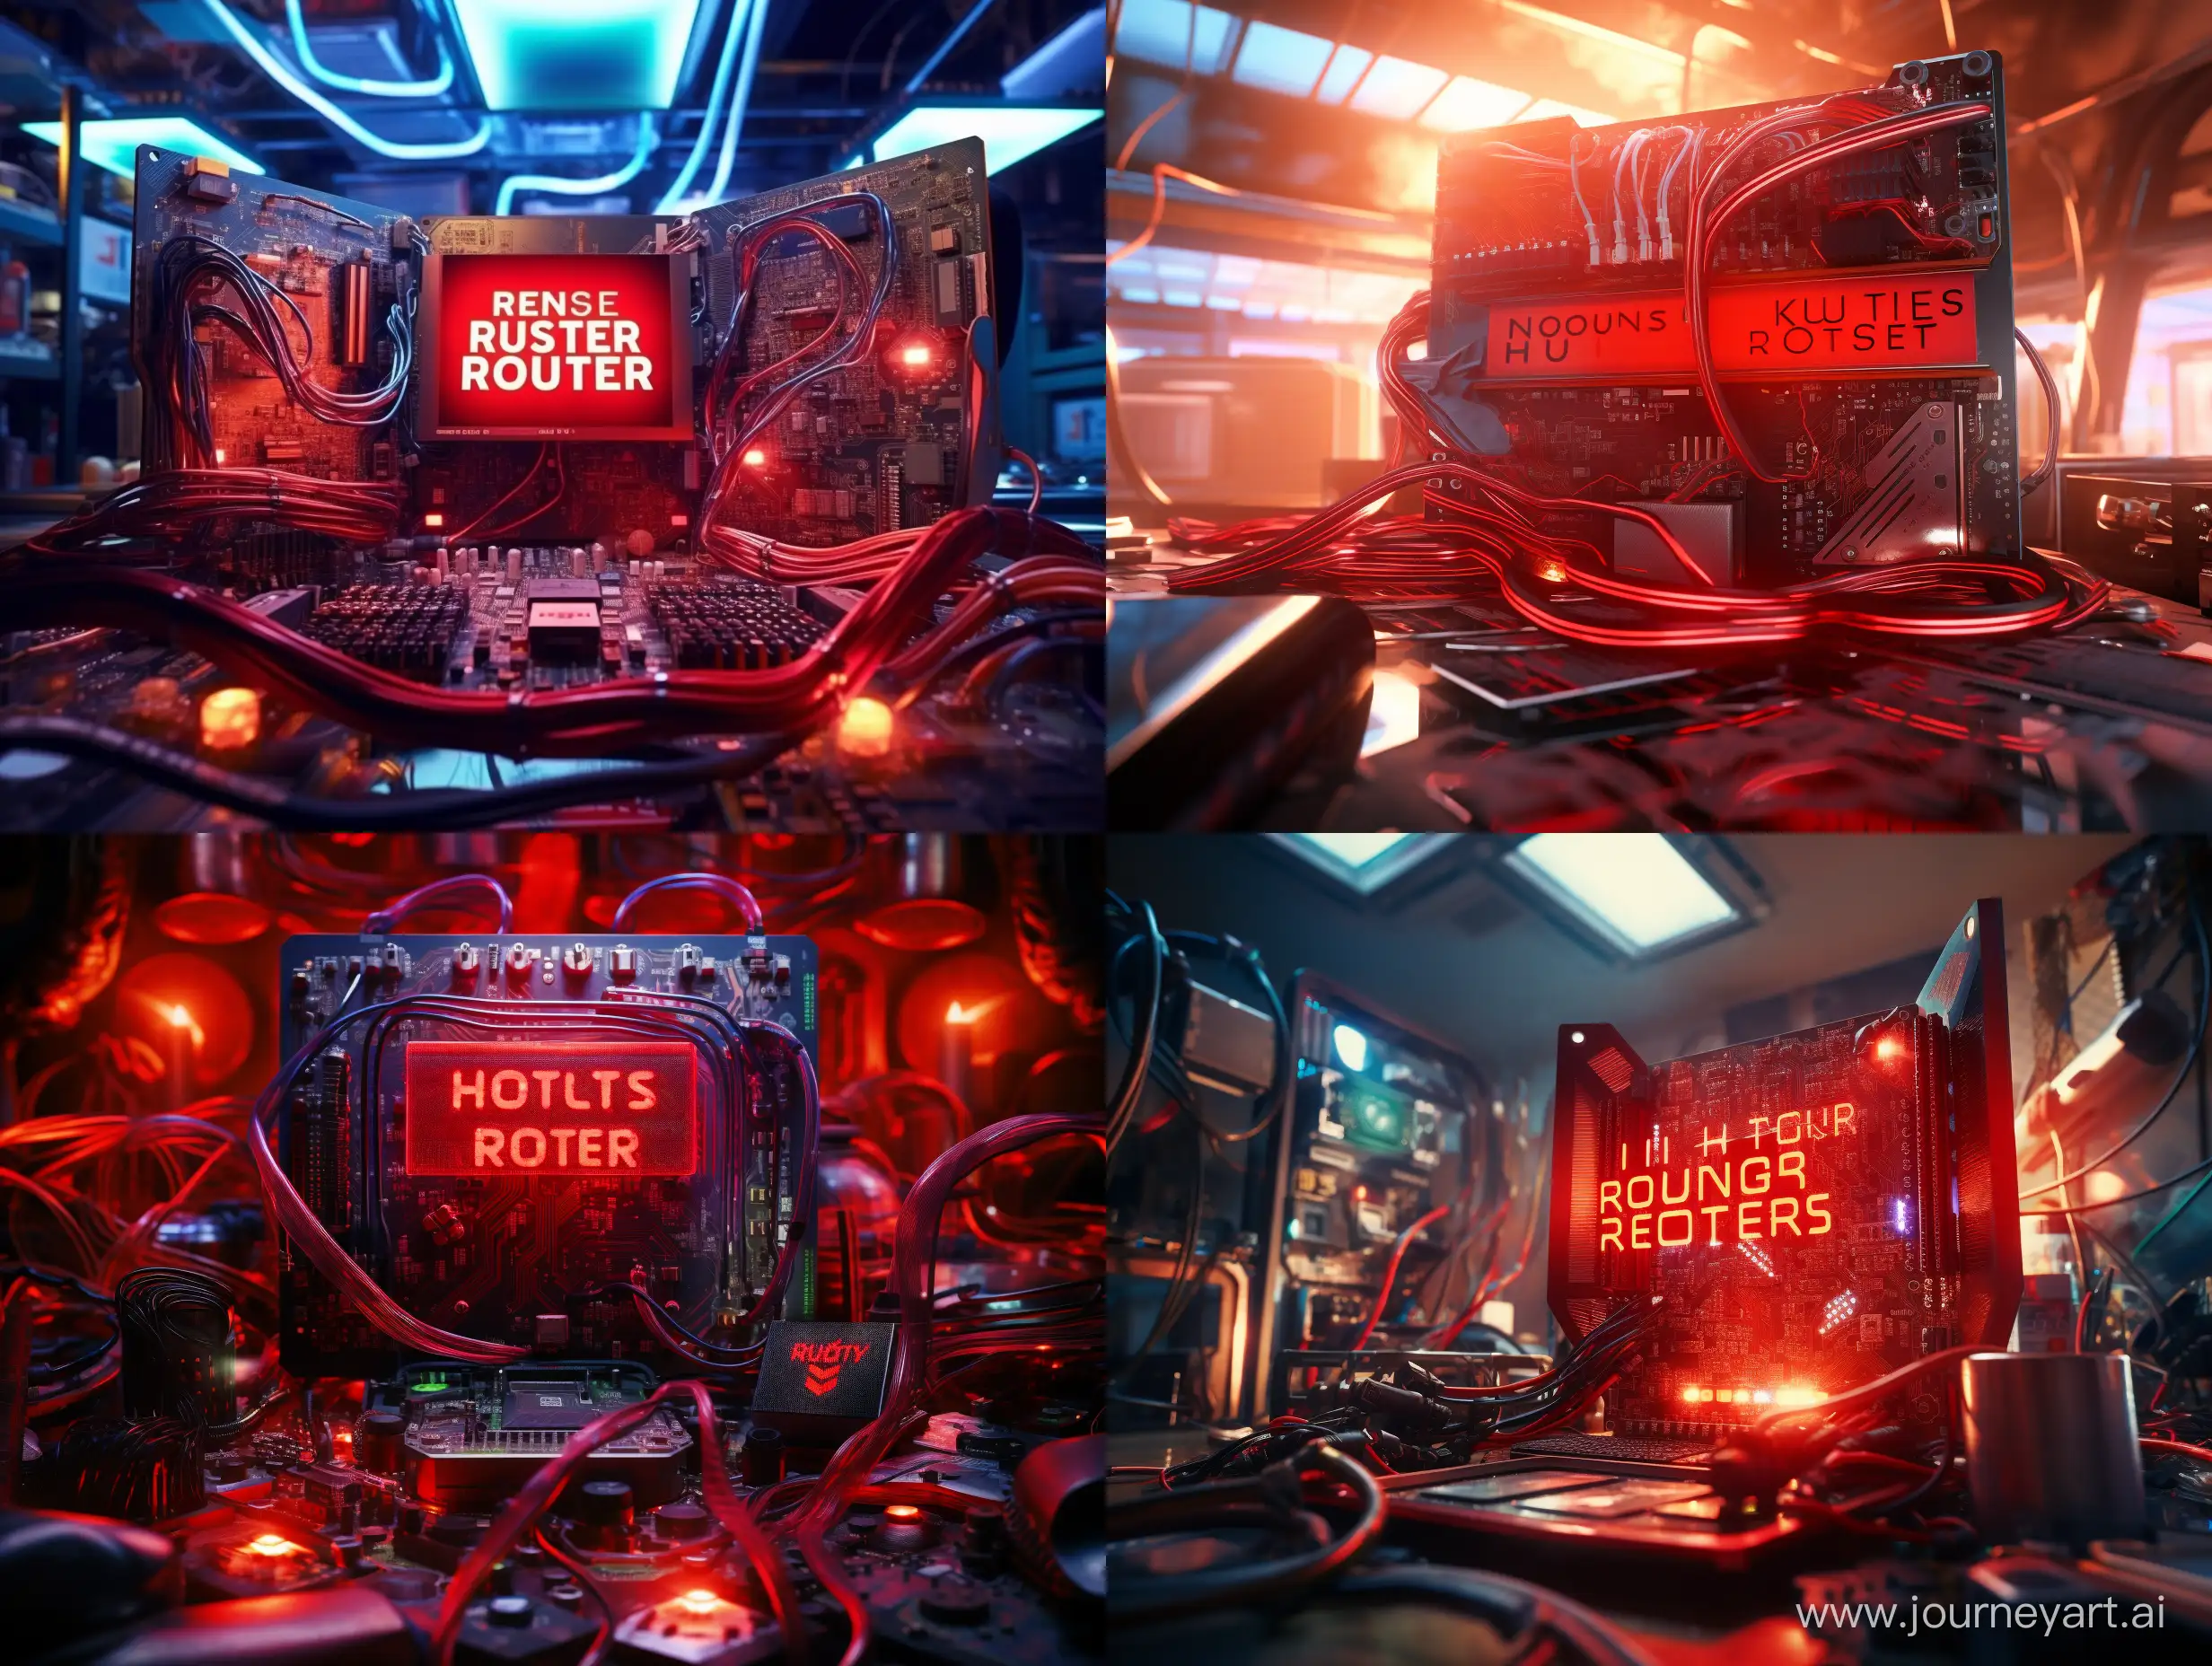 Futuristic-Root-Hunters-Computer-Neon-Metal-Font-in-a-HighTech-Environment